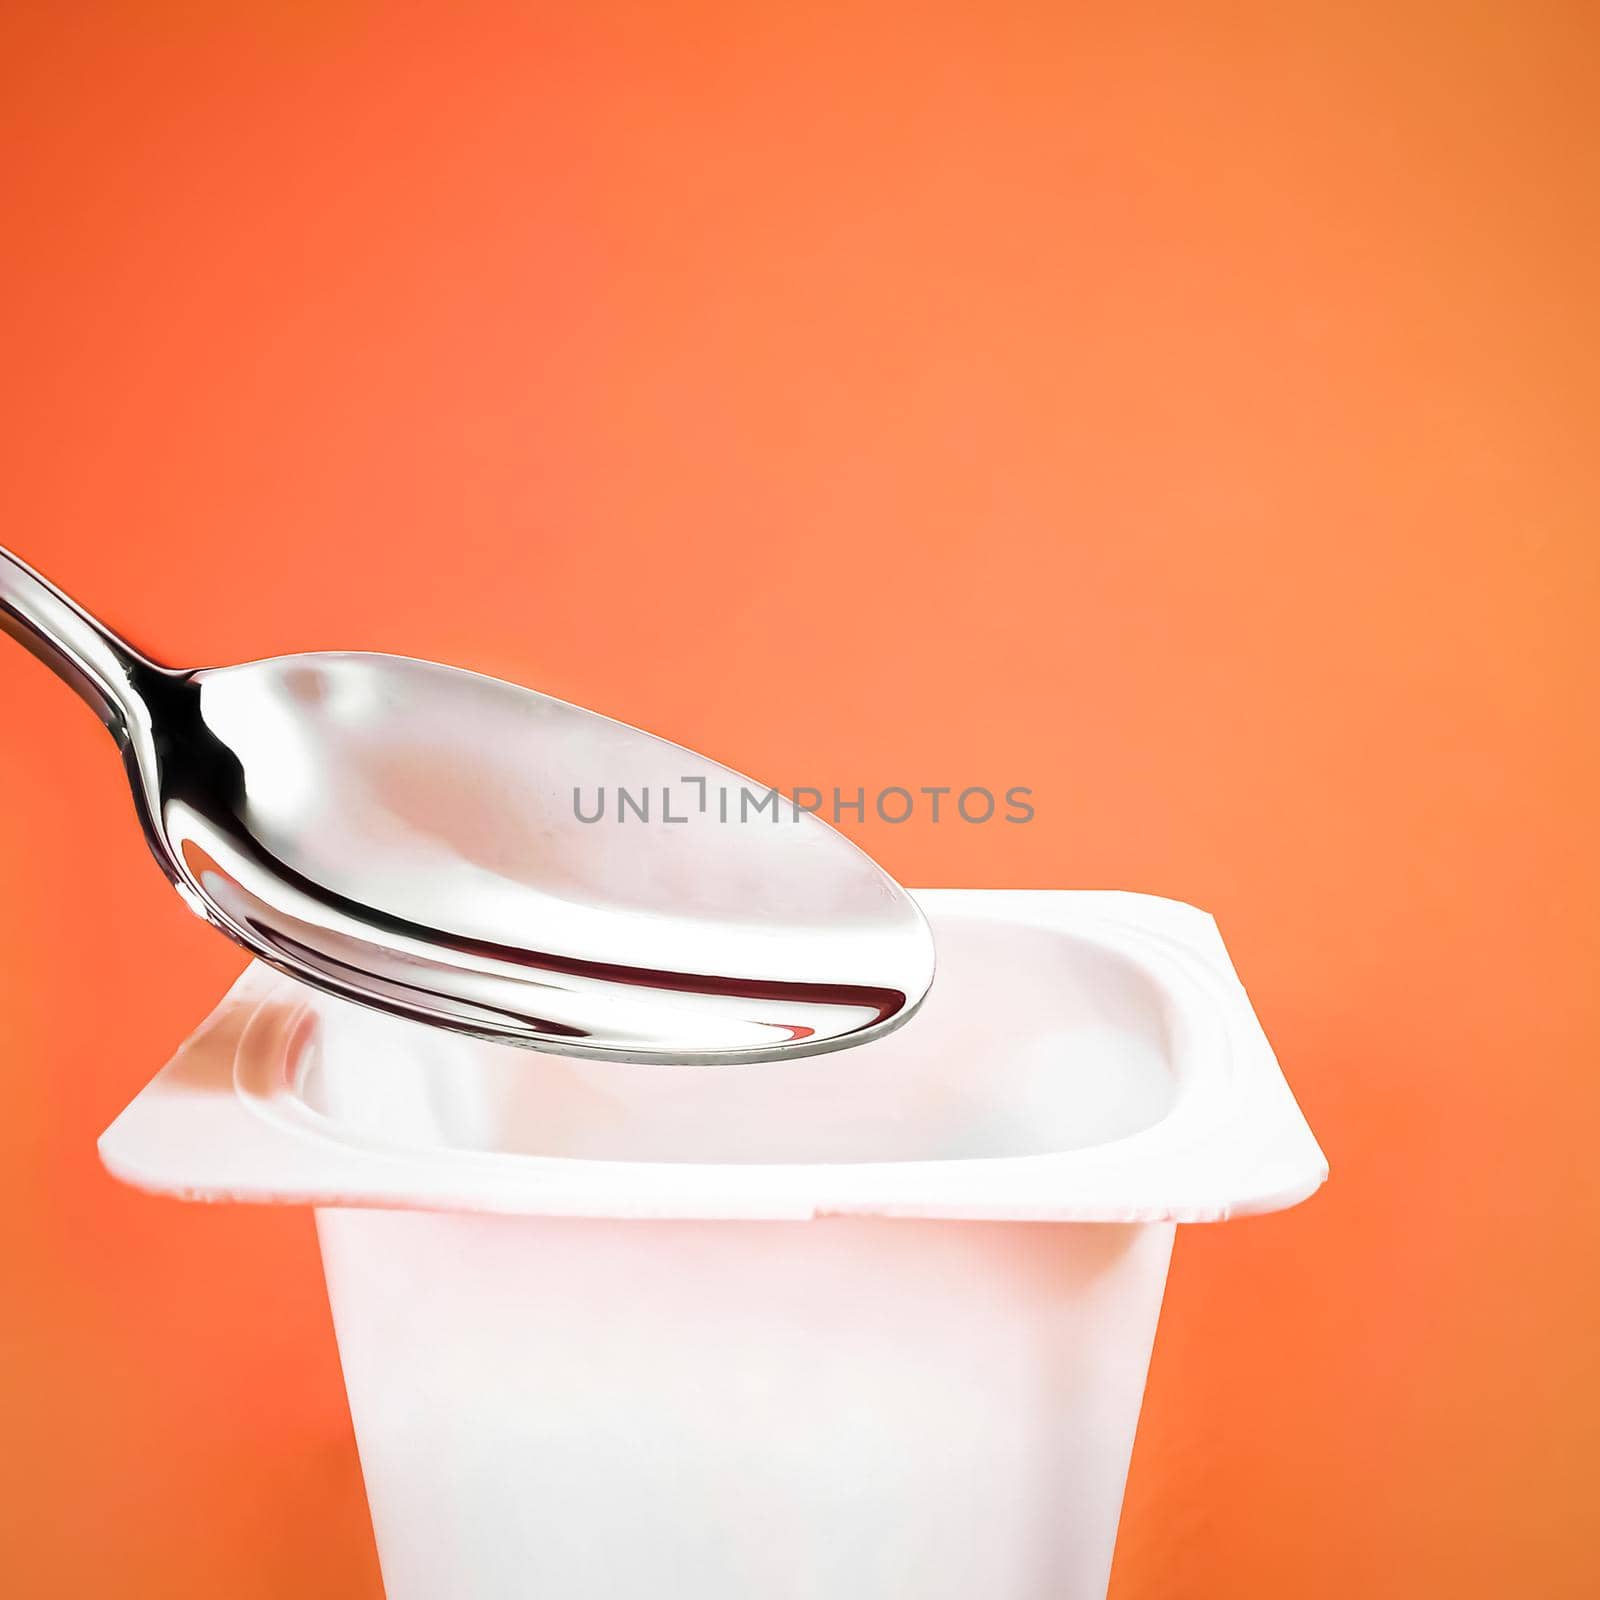 Yogurt cup and silver spoon on orange background, white plastic container with yoghurt cream, fresh dairy product for healthy diet and nutrition balance.